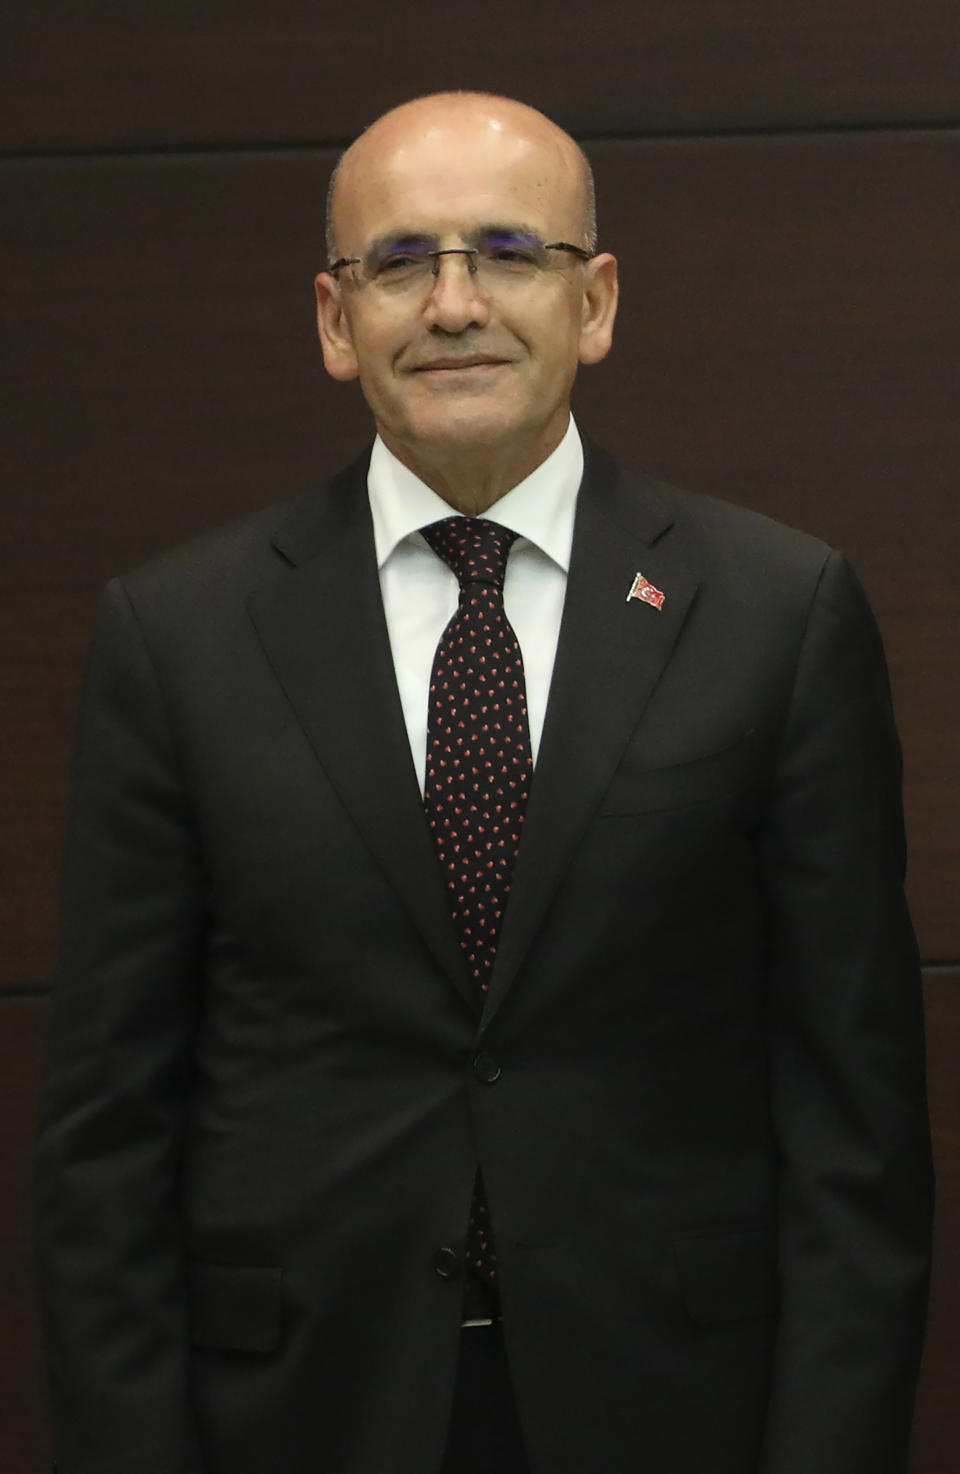 Turkey's new treasury and finance minister Mehmet Simsek, stands during the inauguration ceremony at the presidential complex in Ankara, Turkey, Saturday, June 3, 2023. Turkey's Recep Tayyip Erdogan, who was sworn into his third presidential term on Saturday, reappointed an internationally respected former banker as finance minister in a sign that his new government might pursue more conventional economic policies. (Yavuz Ozden/dia images via AP)